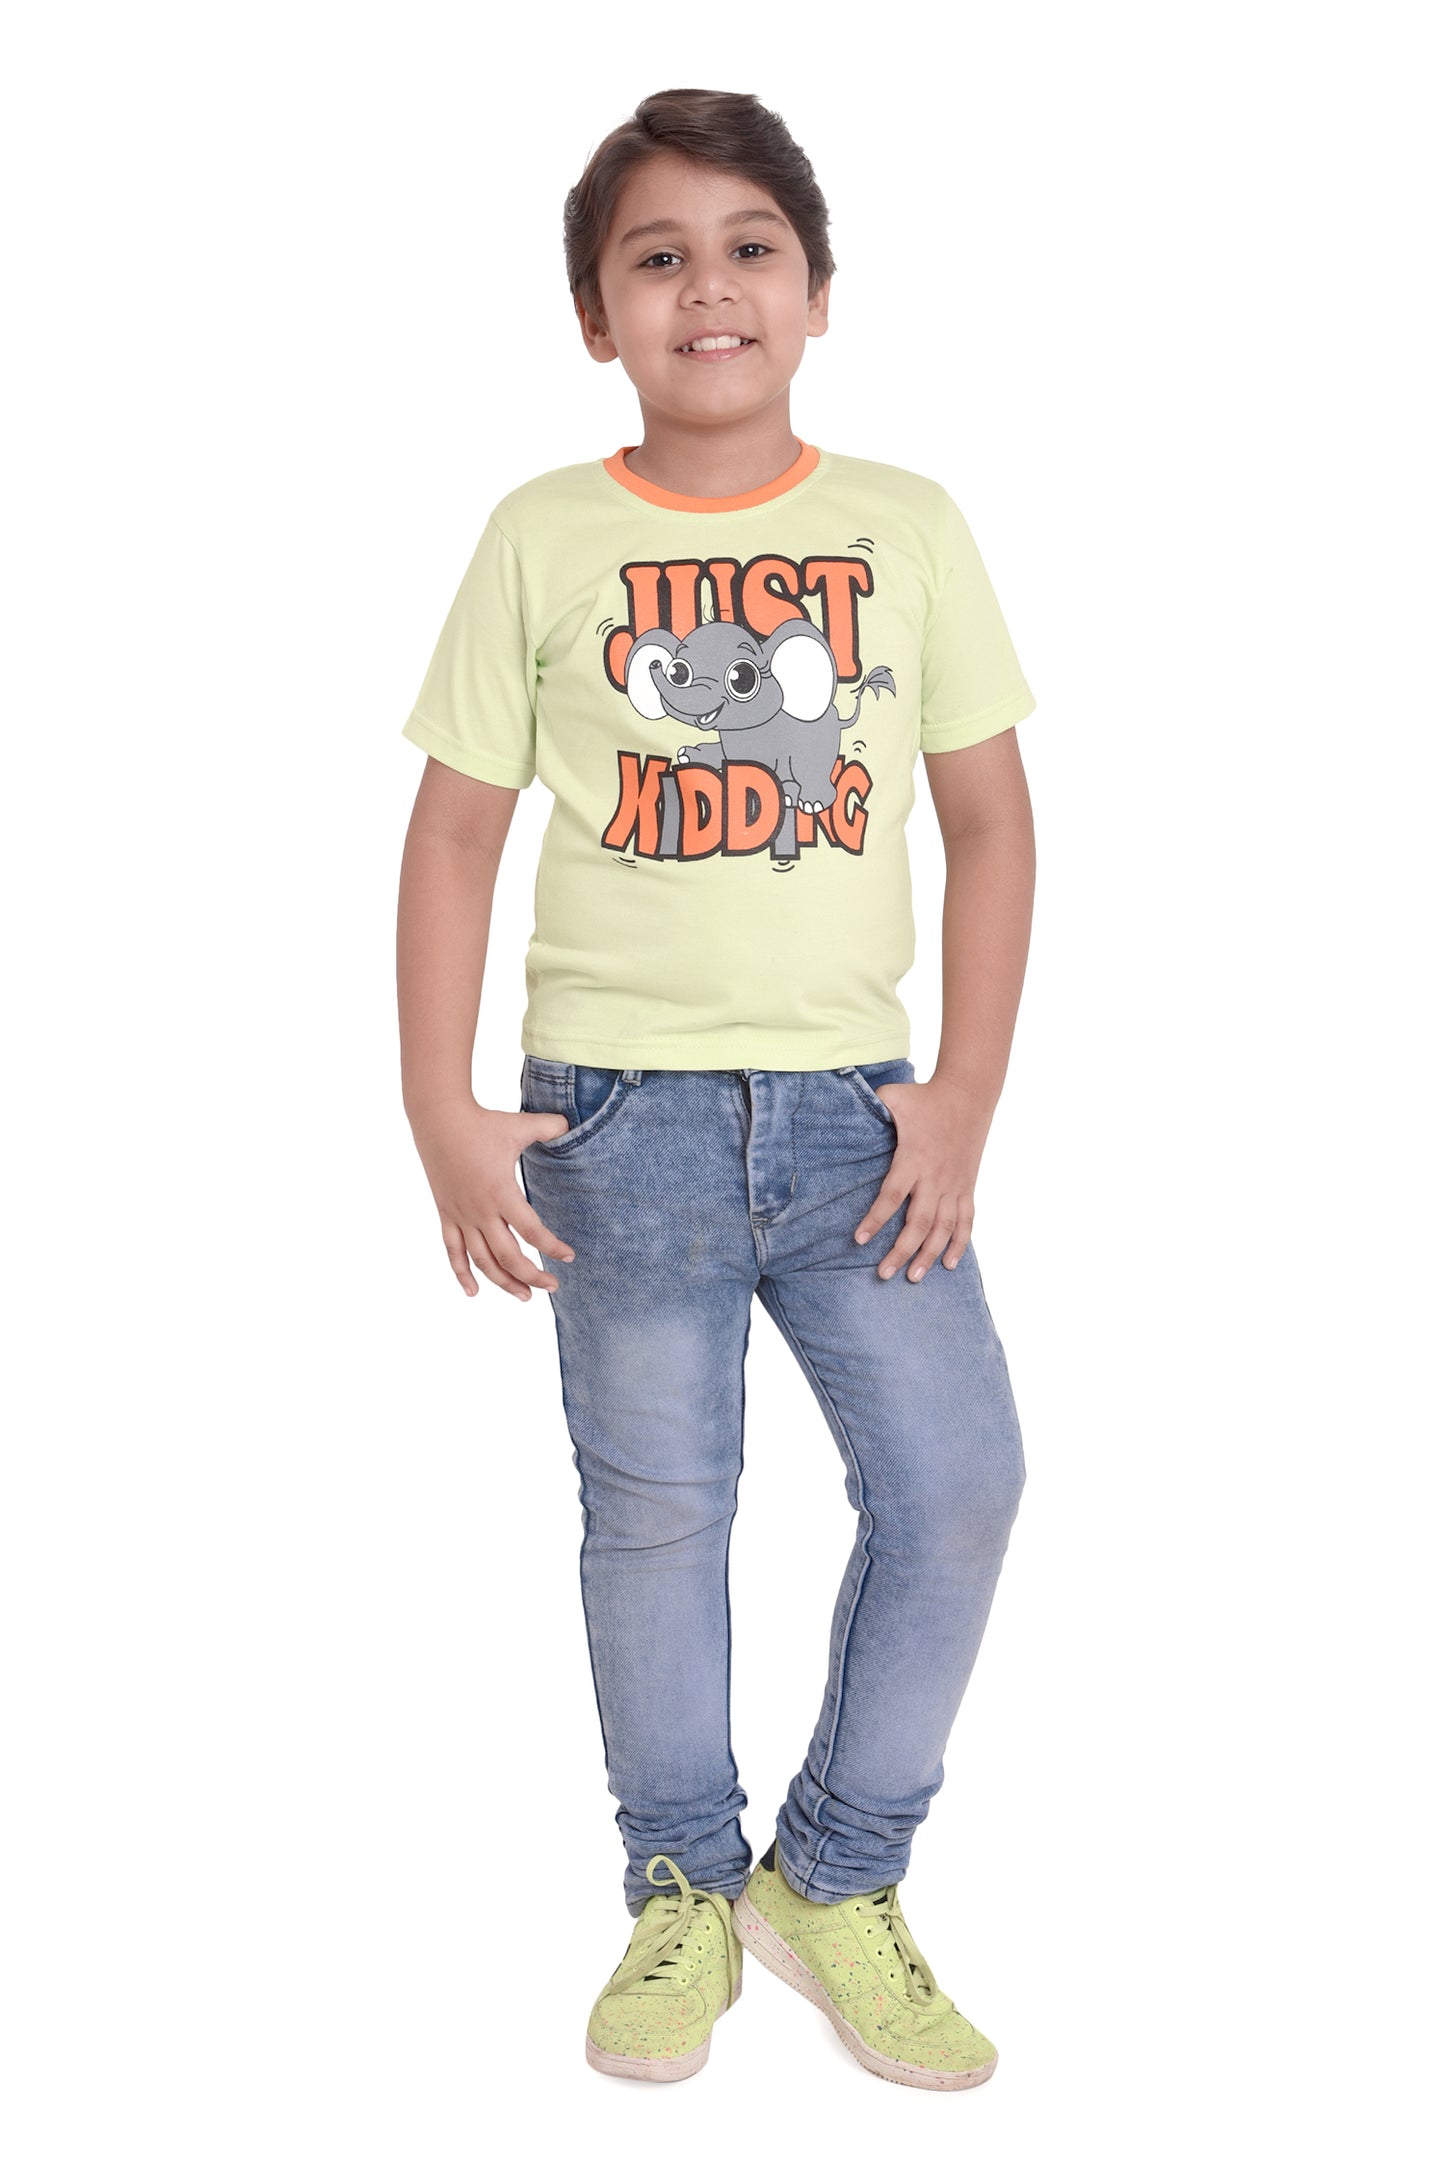 NEO GARMENTS Kids Unisex Round Neck Printed Cotton T-shirt - JUST KIDDING | SIZE FROM 1 YRS TO 7 YRS.